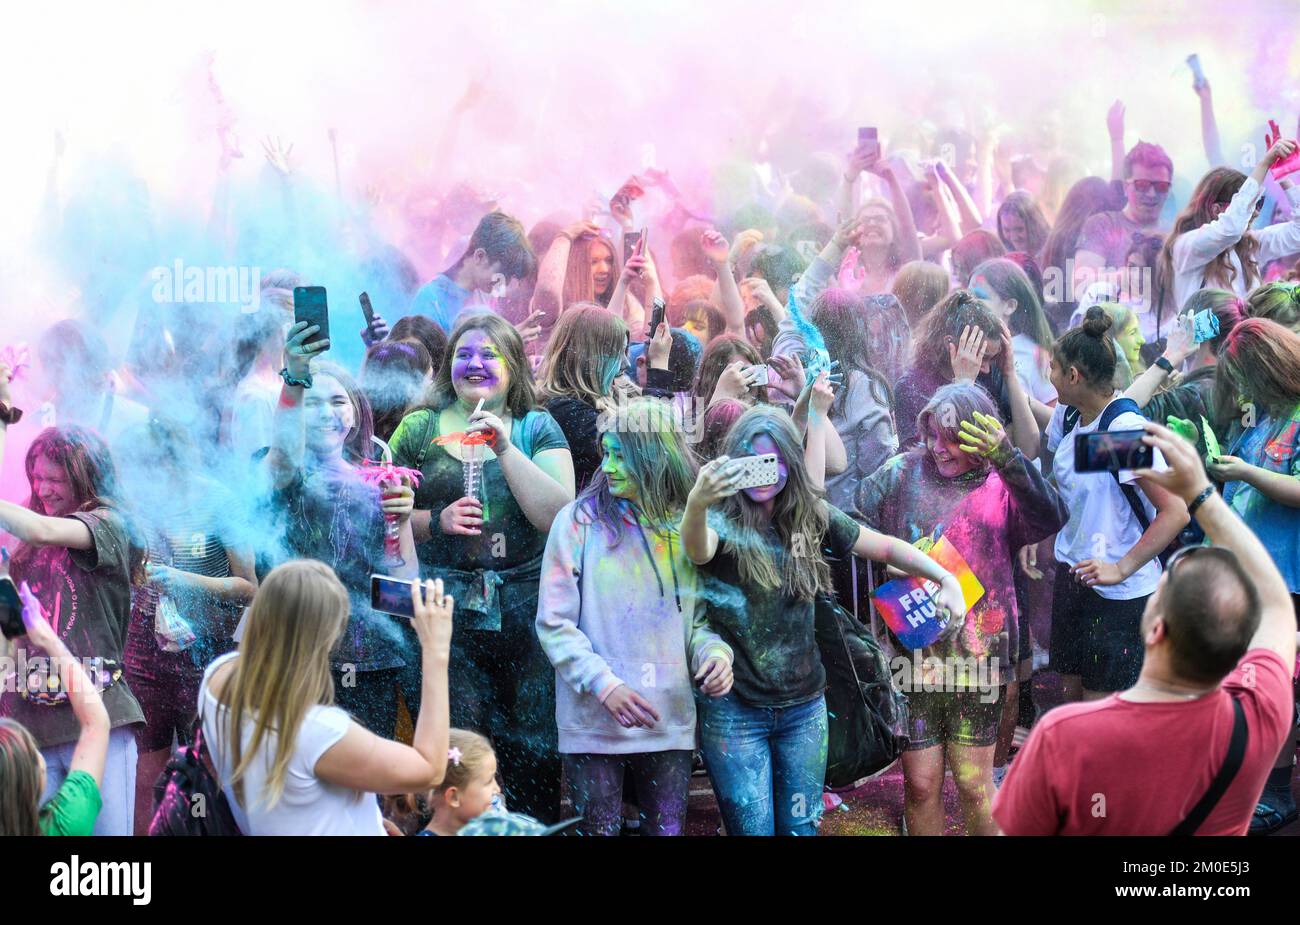 Effects of Holi festival - Perfect Pollucon Services